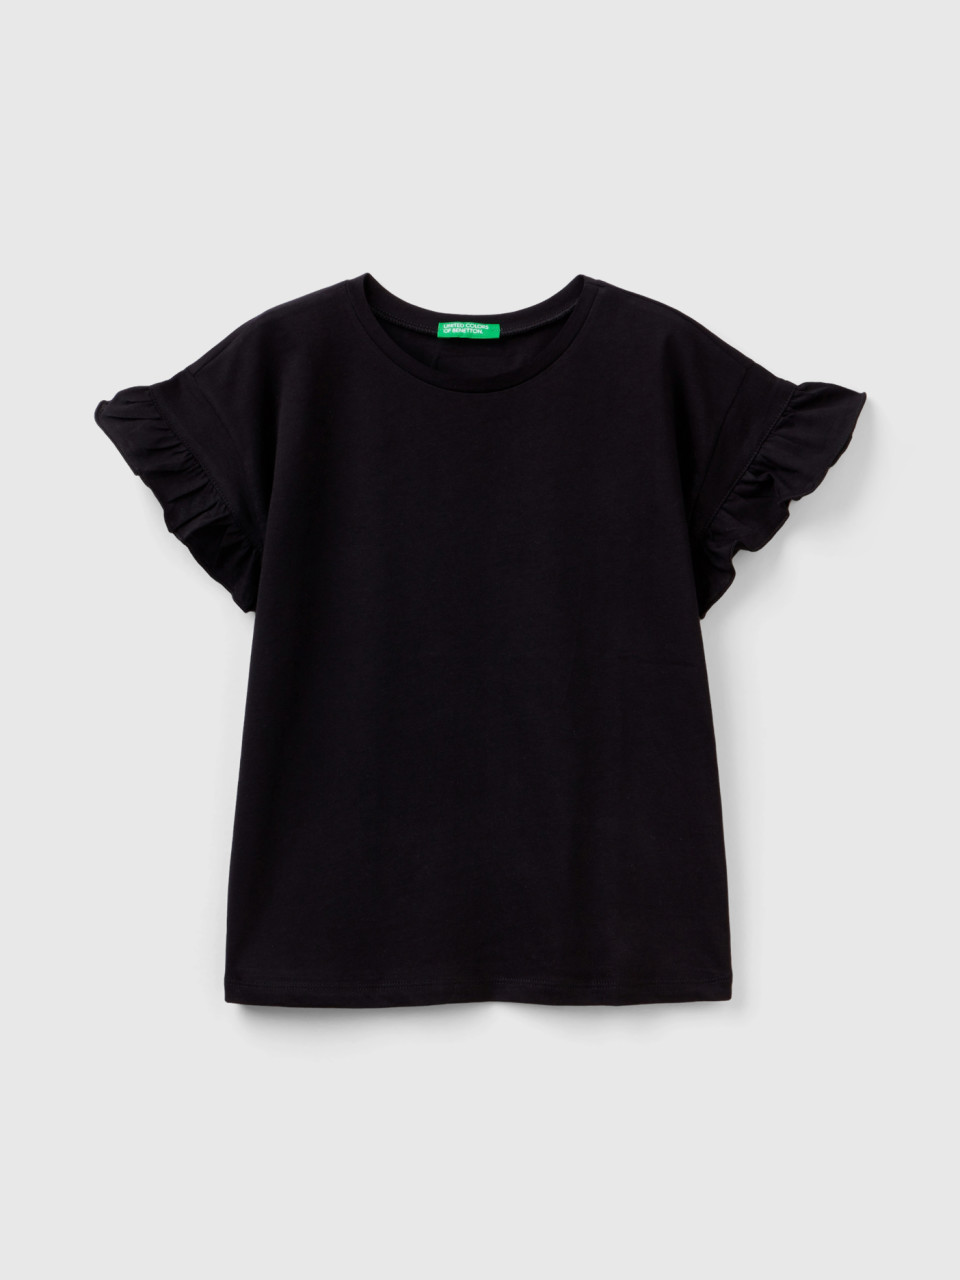 Benetton, Short Sleeve T-shirt With Rouches, Black, Kids